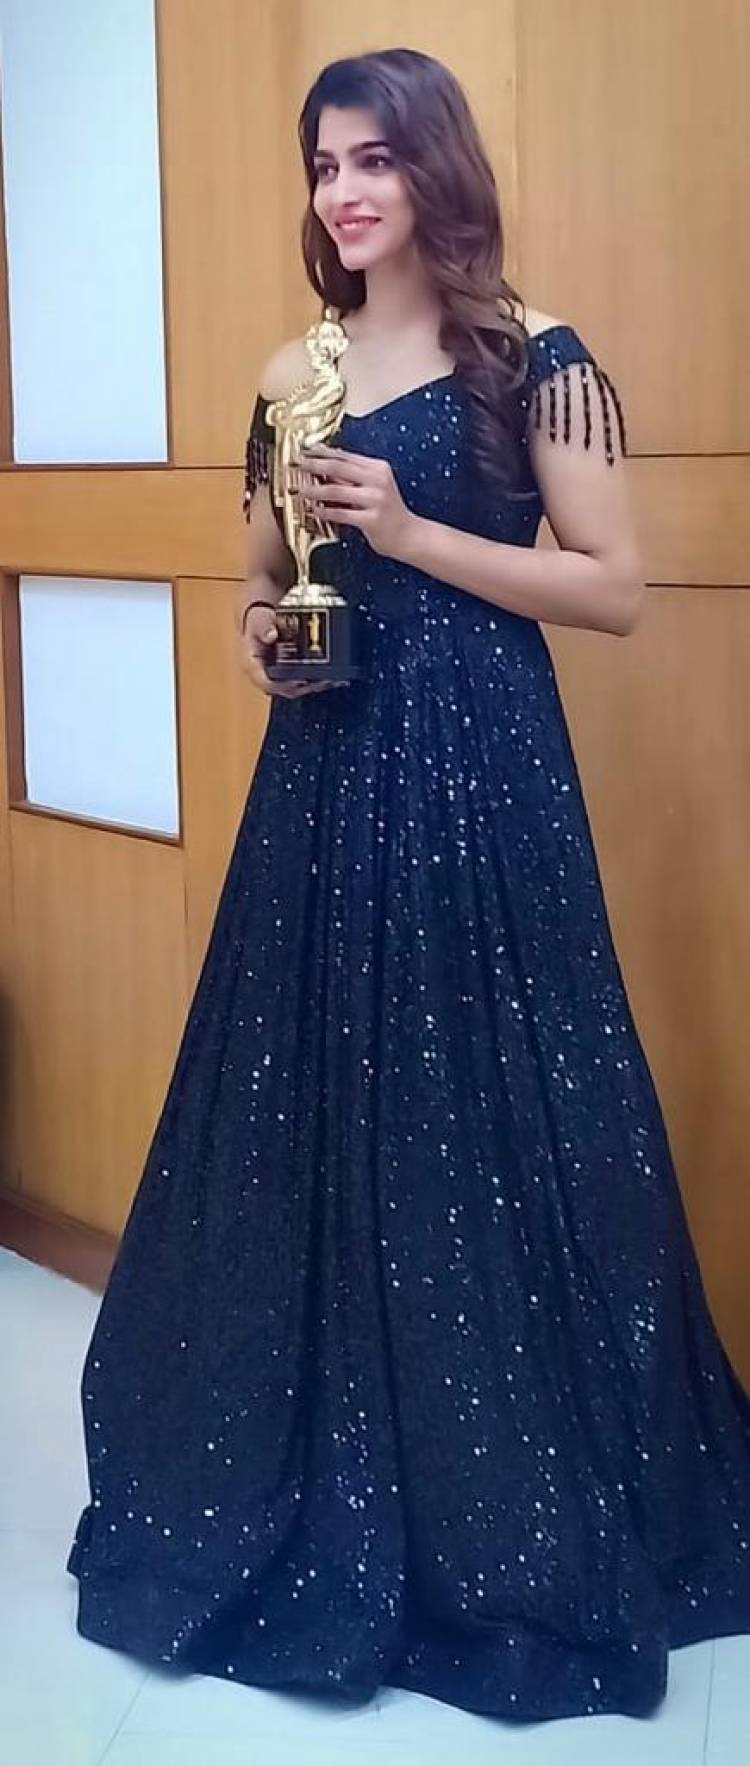 Phenomenal kollywood Queen,SaiDhanshika for bagging the VikatanAwards2020 as Best Female Actress in a Negative Role